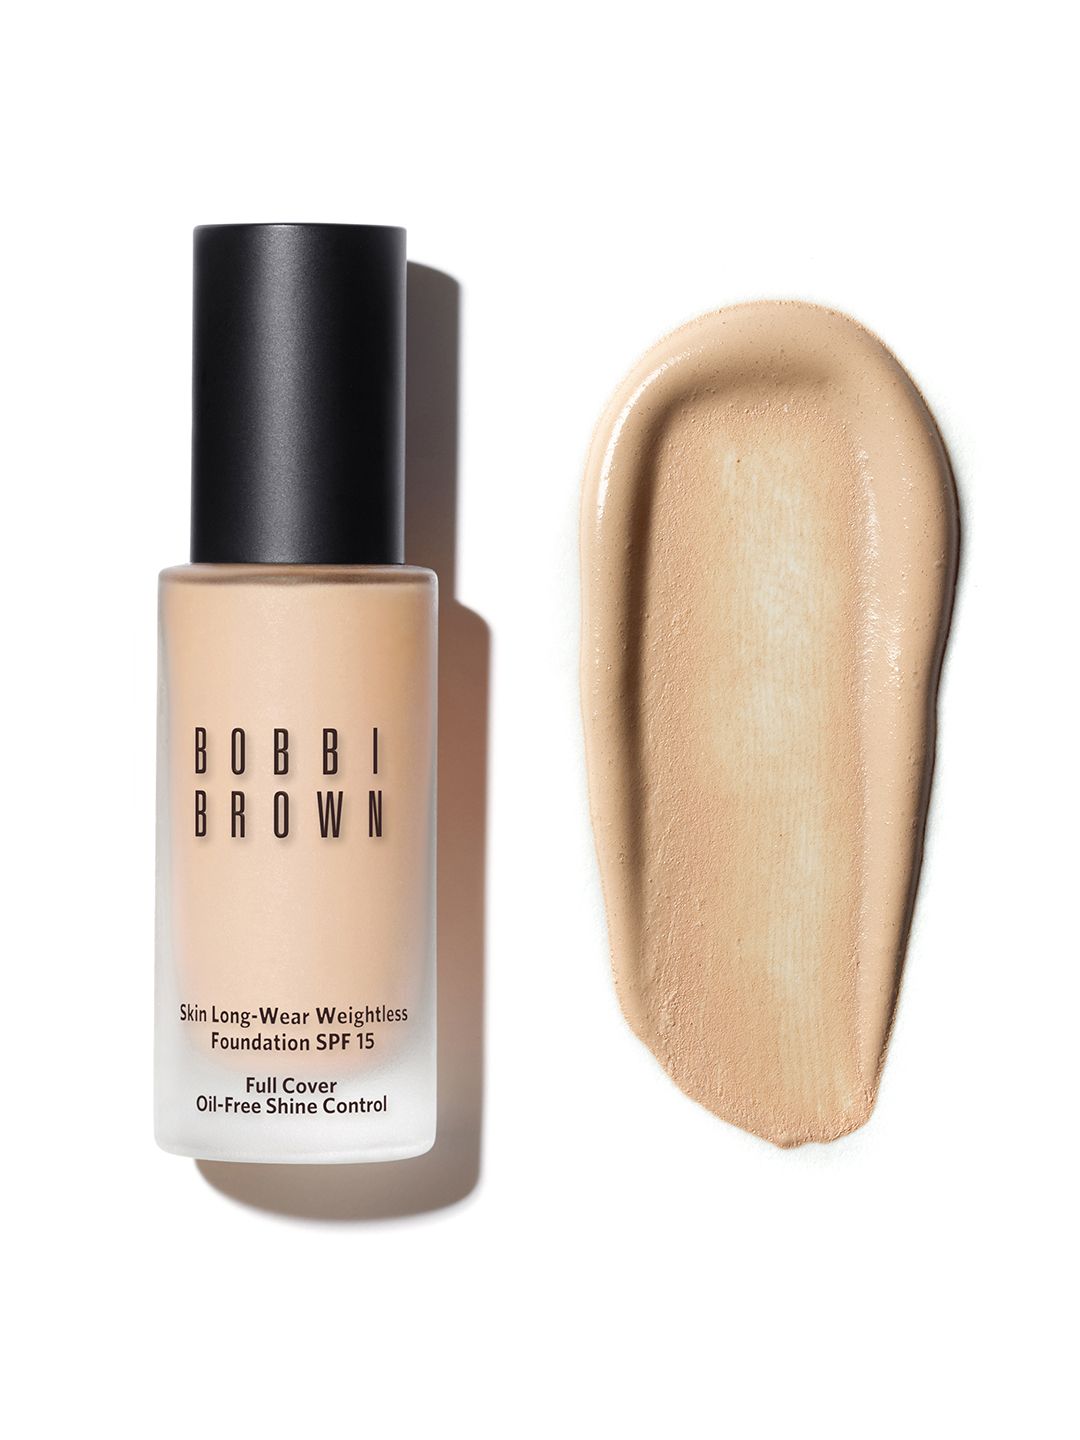 Bobbi Brown Skin Long-Wear Weightless Foundation with SPF 15 - Porcelain N-012/0 Price in India